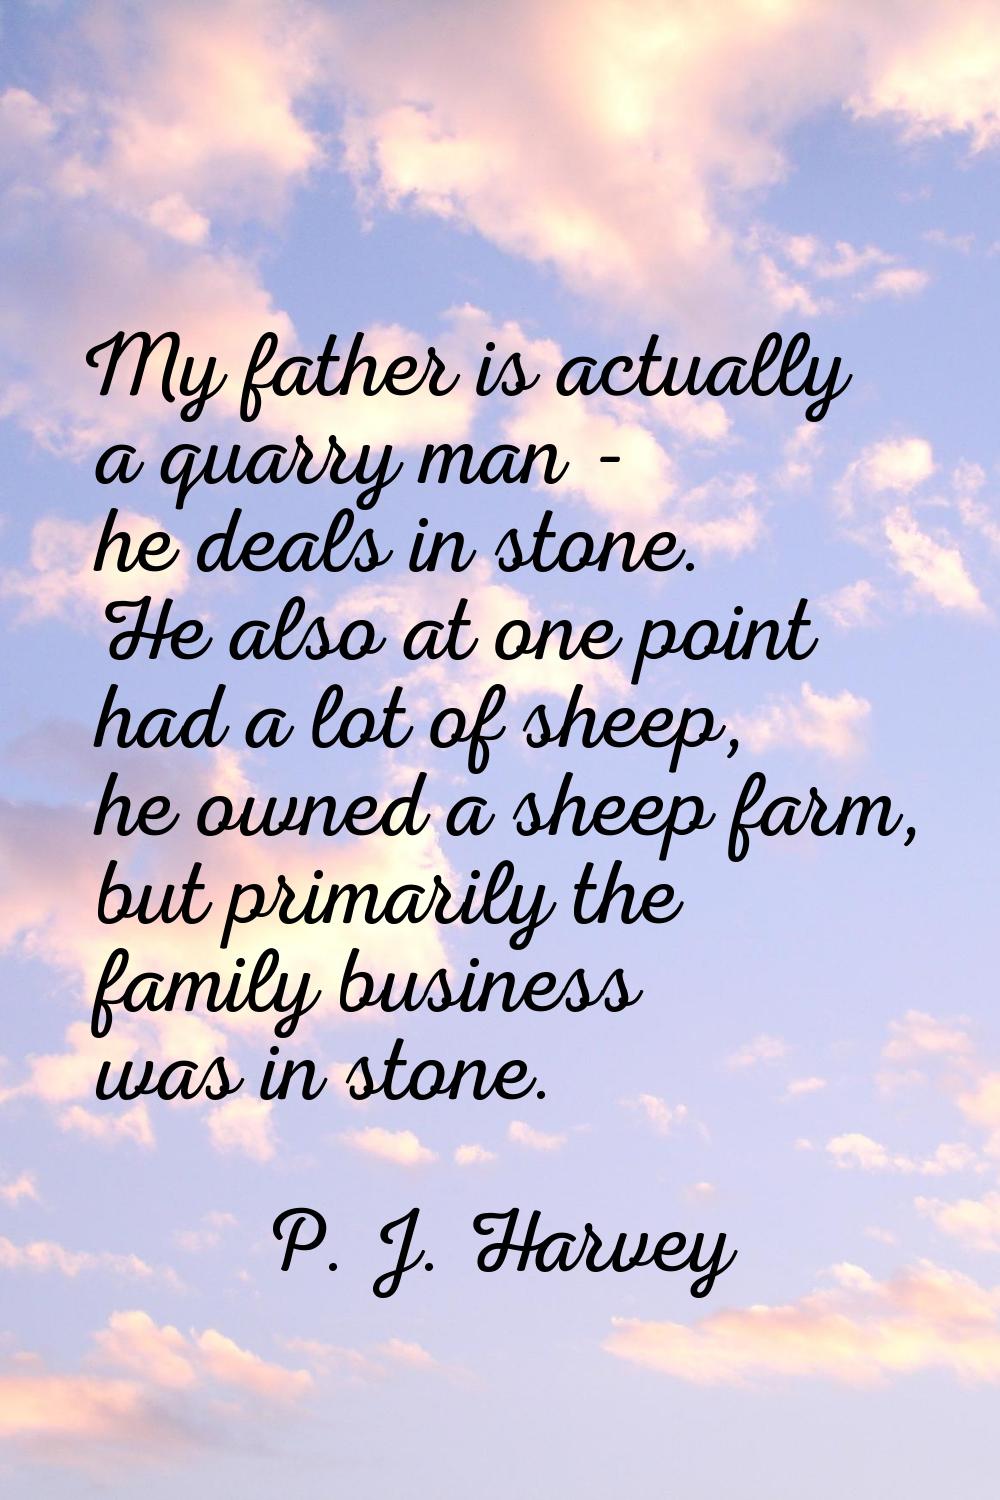 My father is actually a quarry man - he deals in stone. He also at one point had a lot of sheep, he